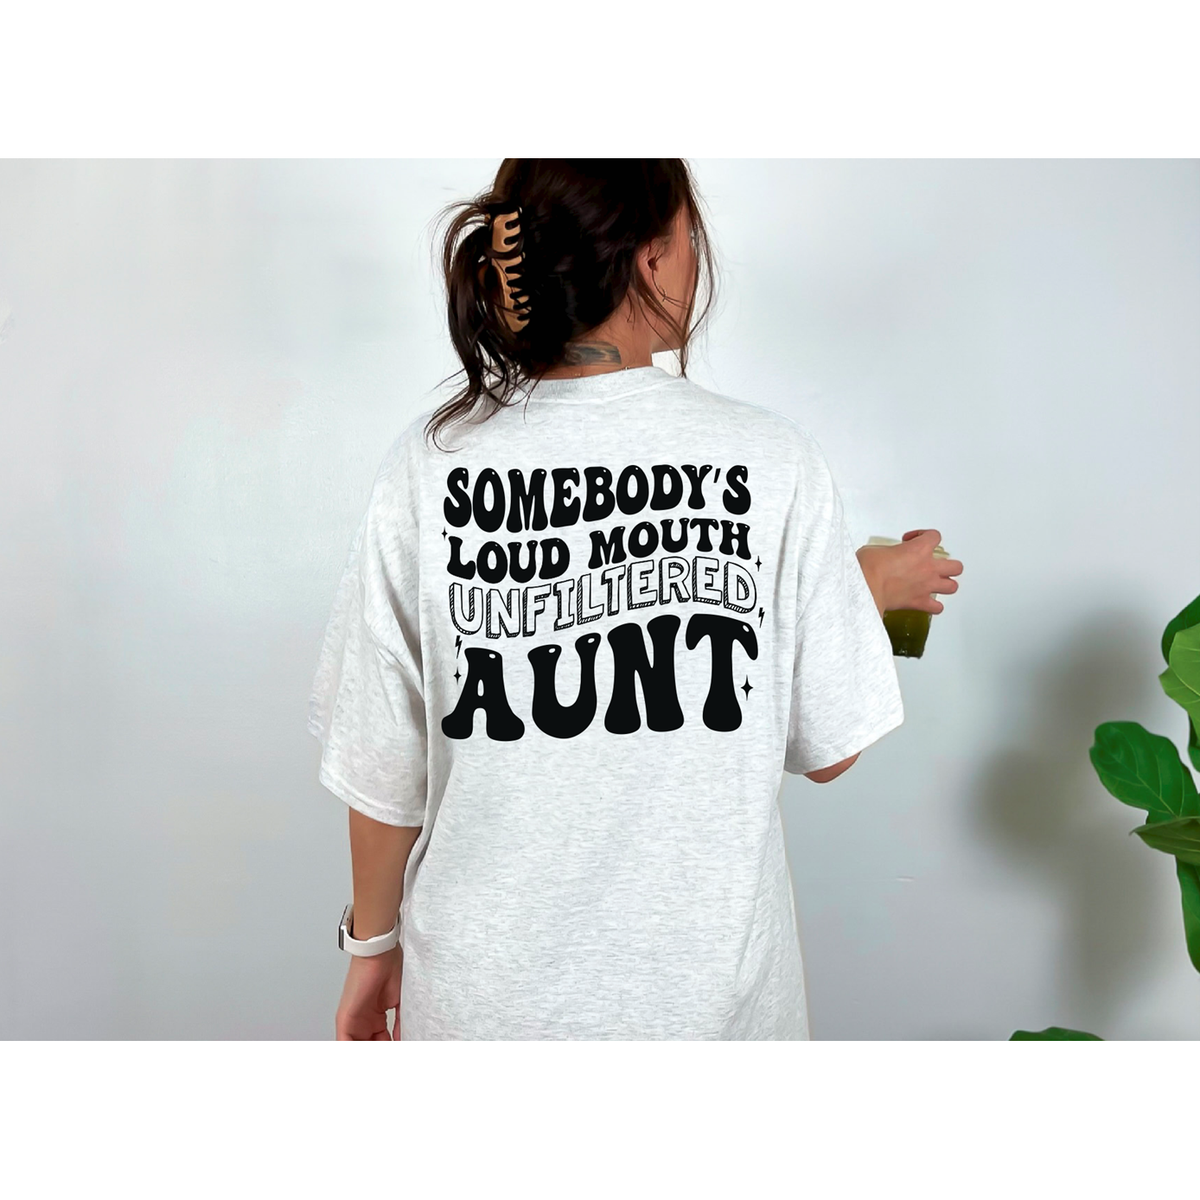 Solid Loud Mouth Unfiltered Aunt Tee